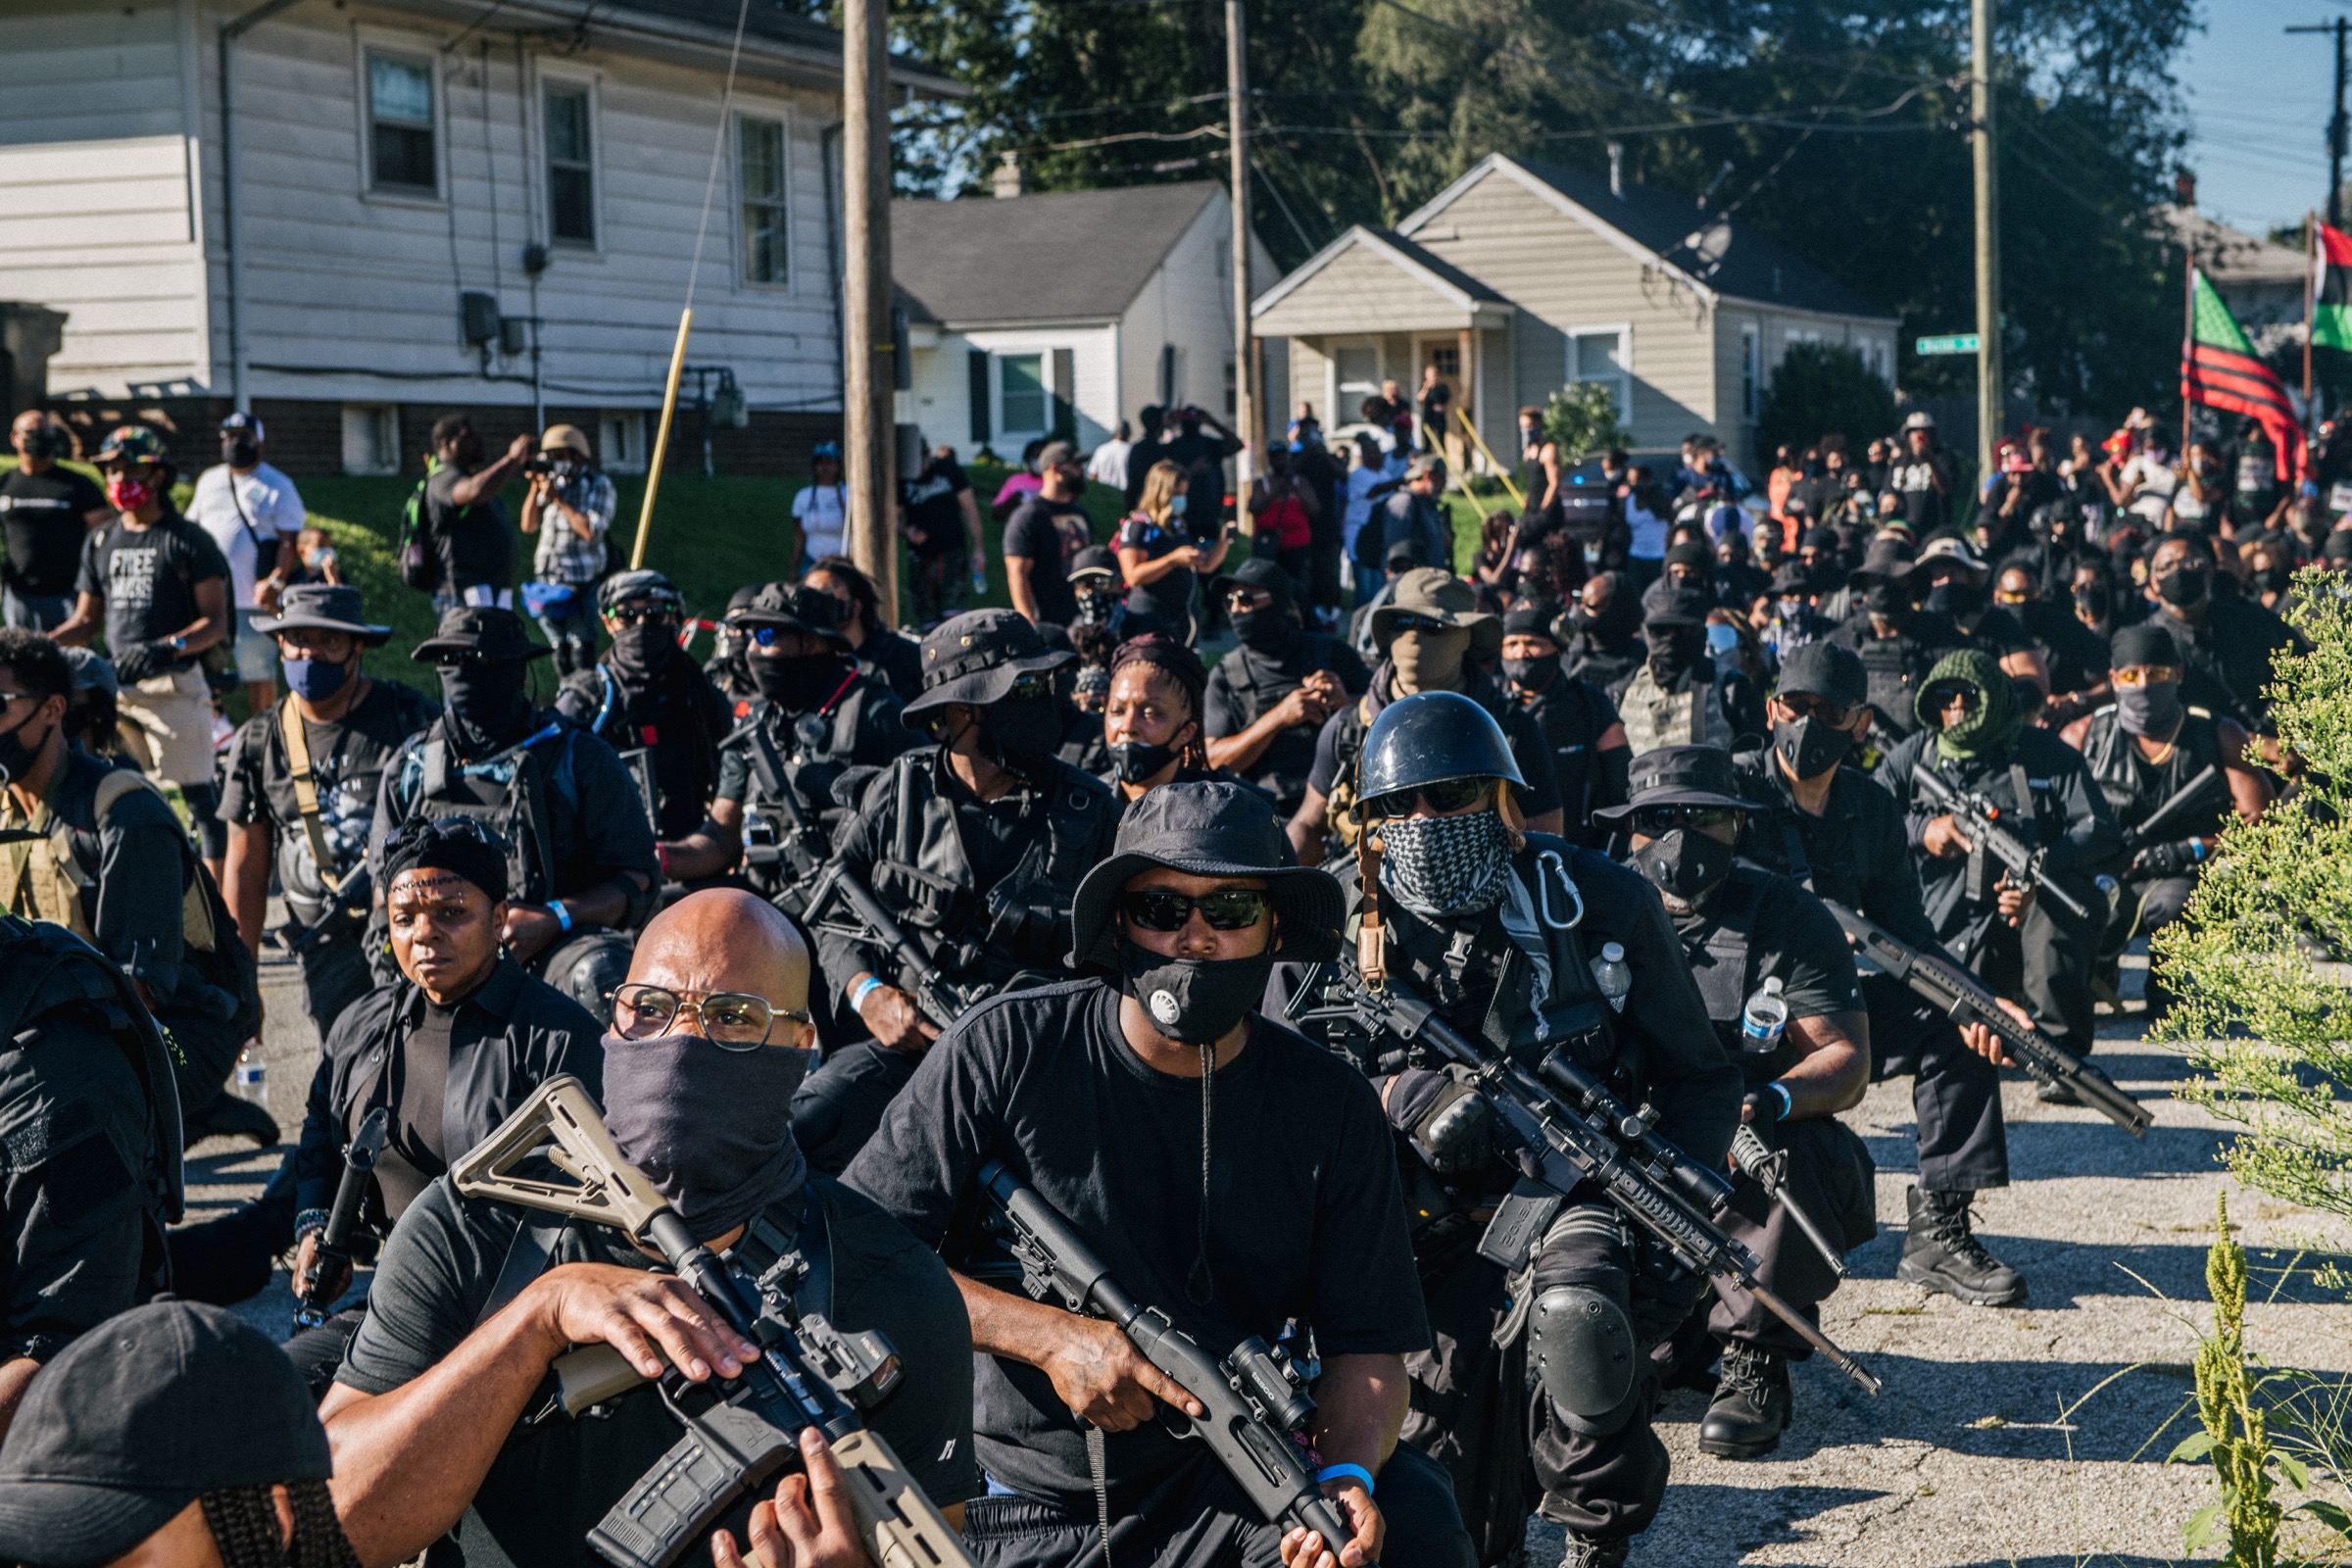 Black People Formed One of the Largest Militias in the U.S. Now Its Leader Is In Prosecutors’ Crosshairs.